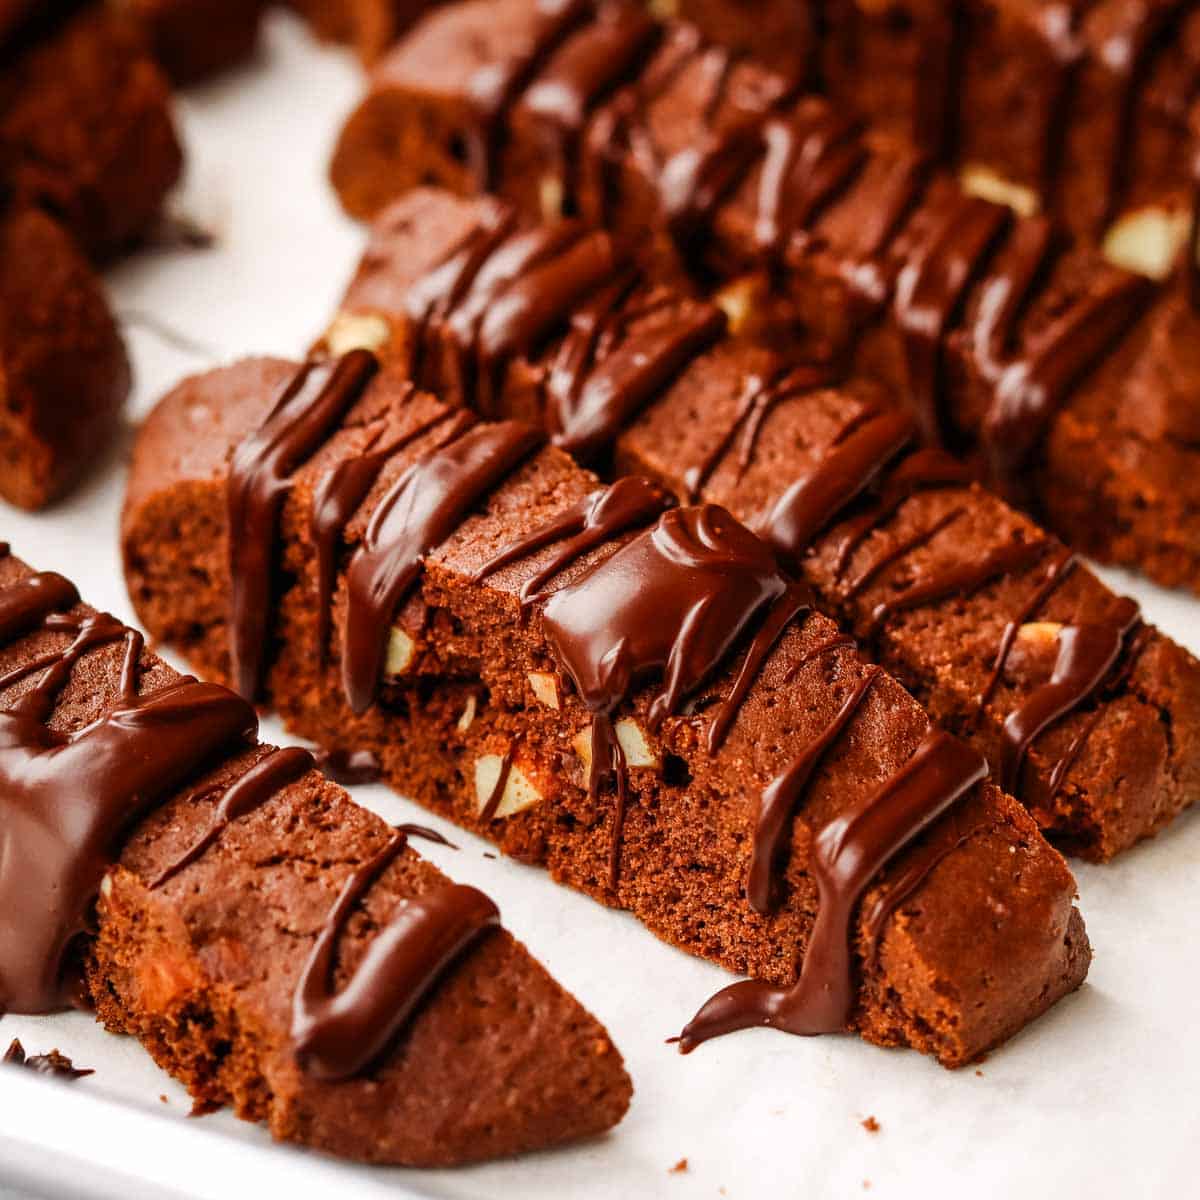 Chocolate almond biscotti drizzled with chocolate.